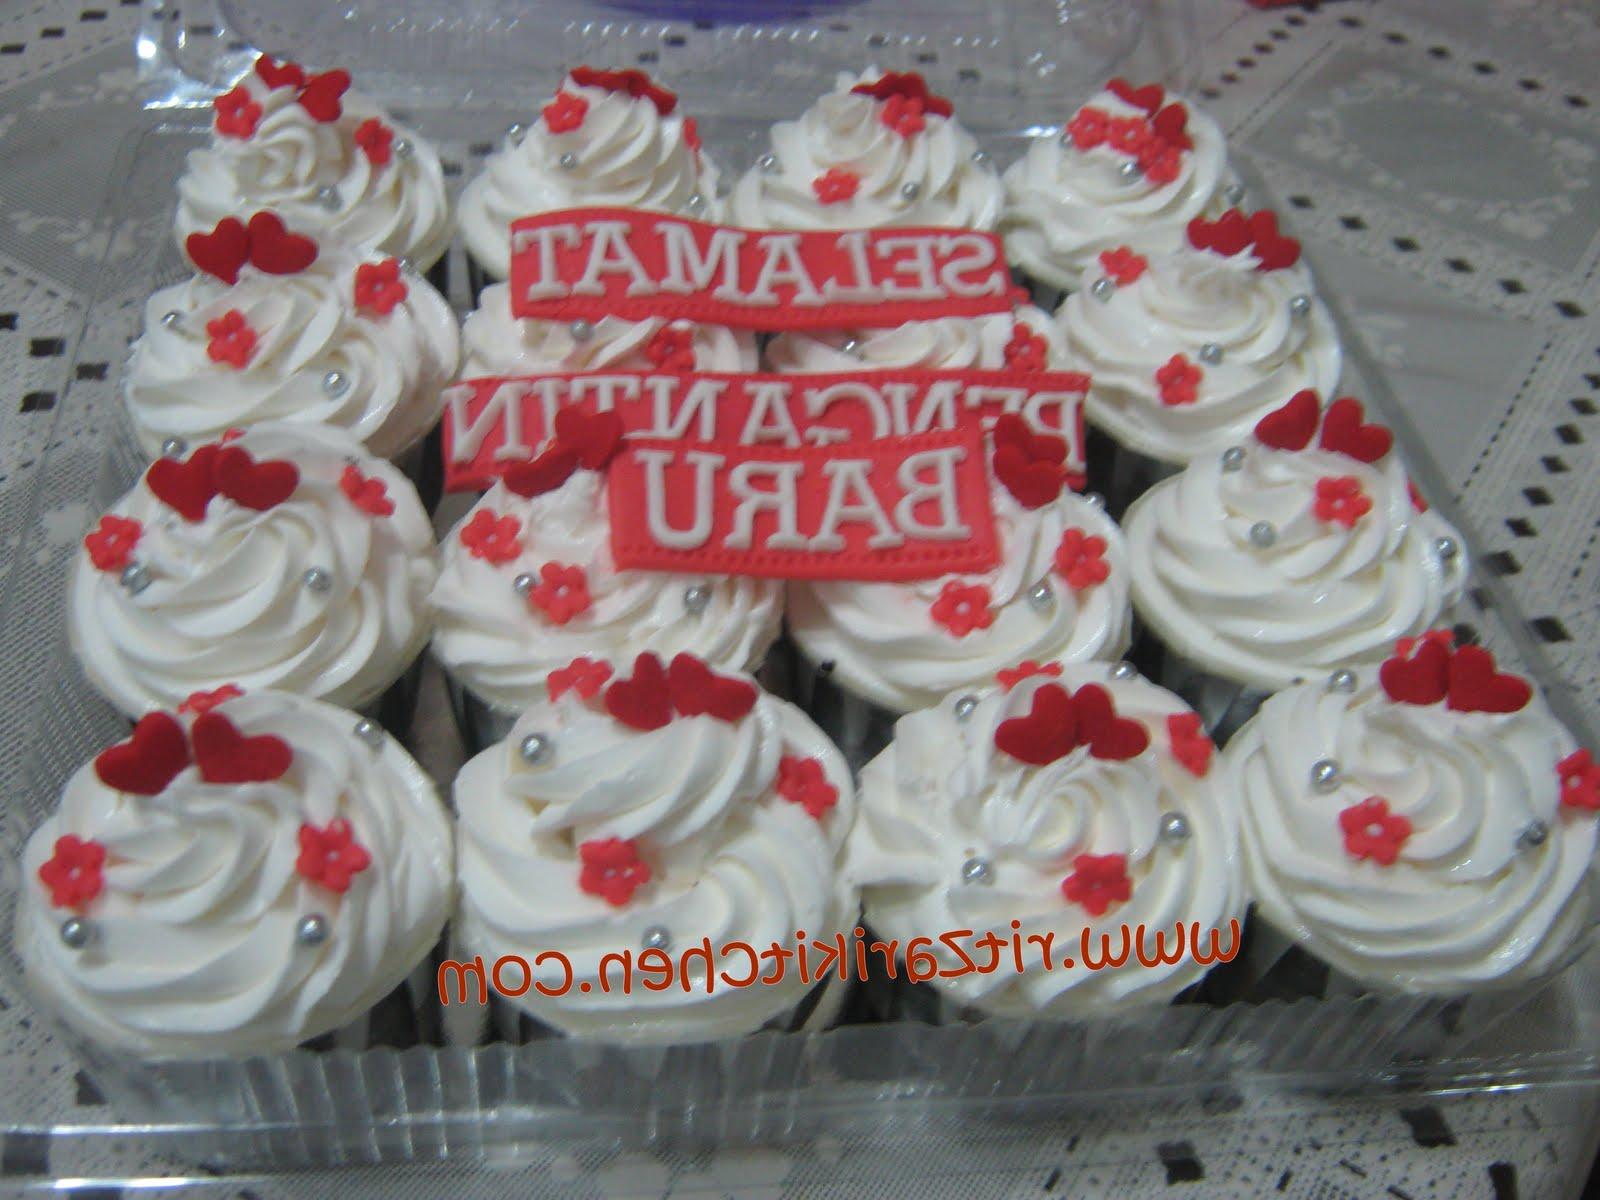 Red and White Theme Wedding